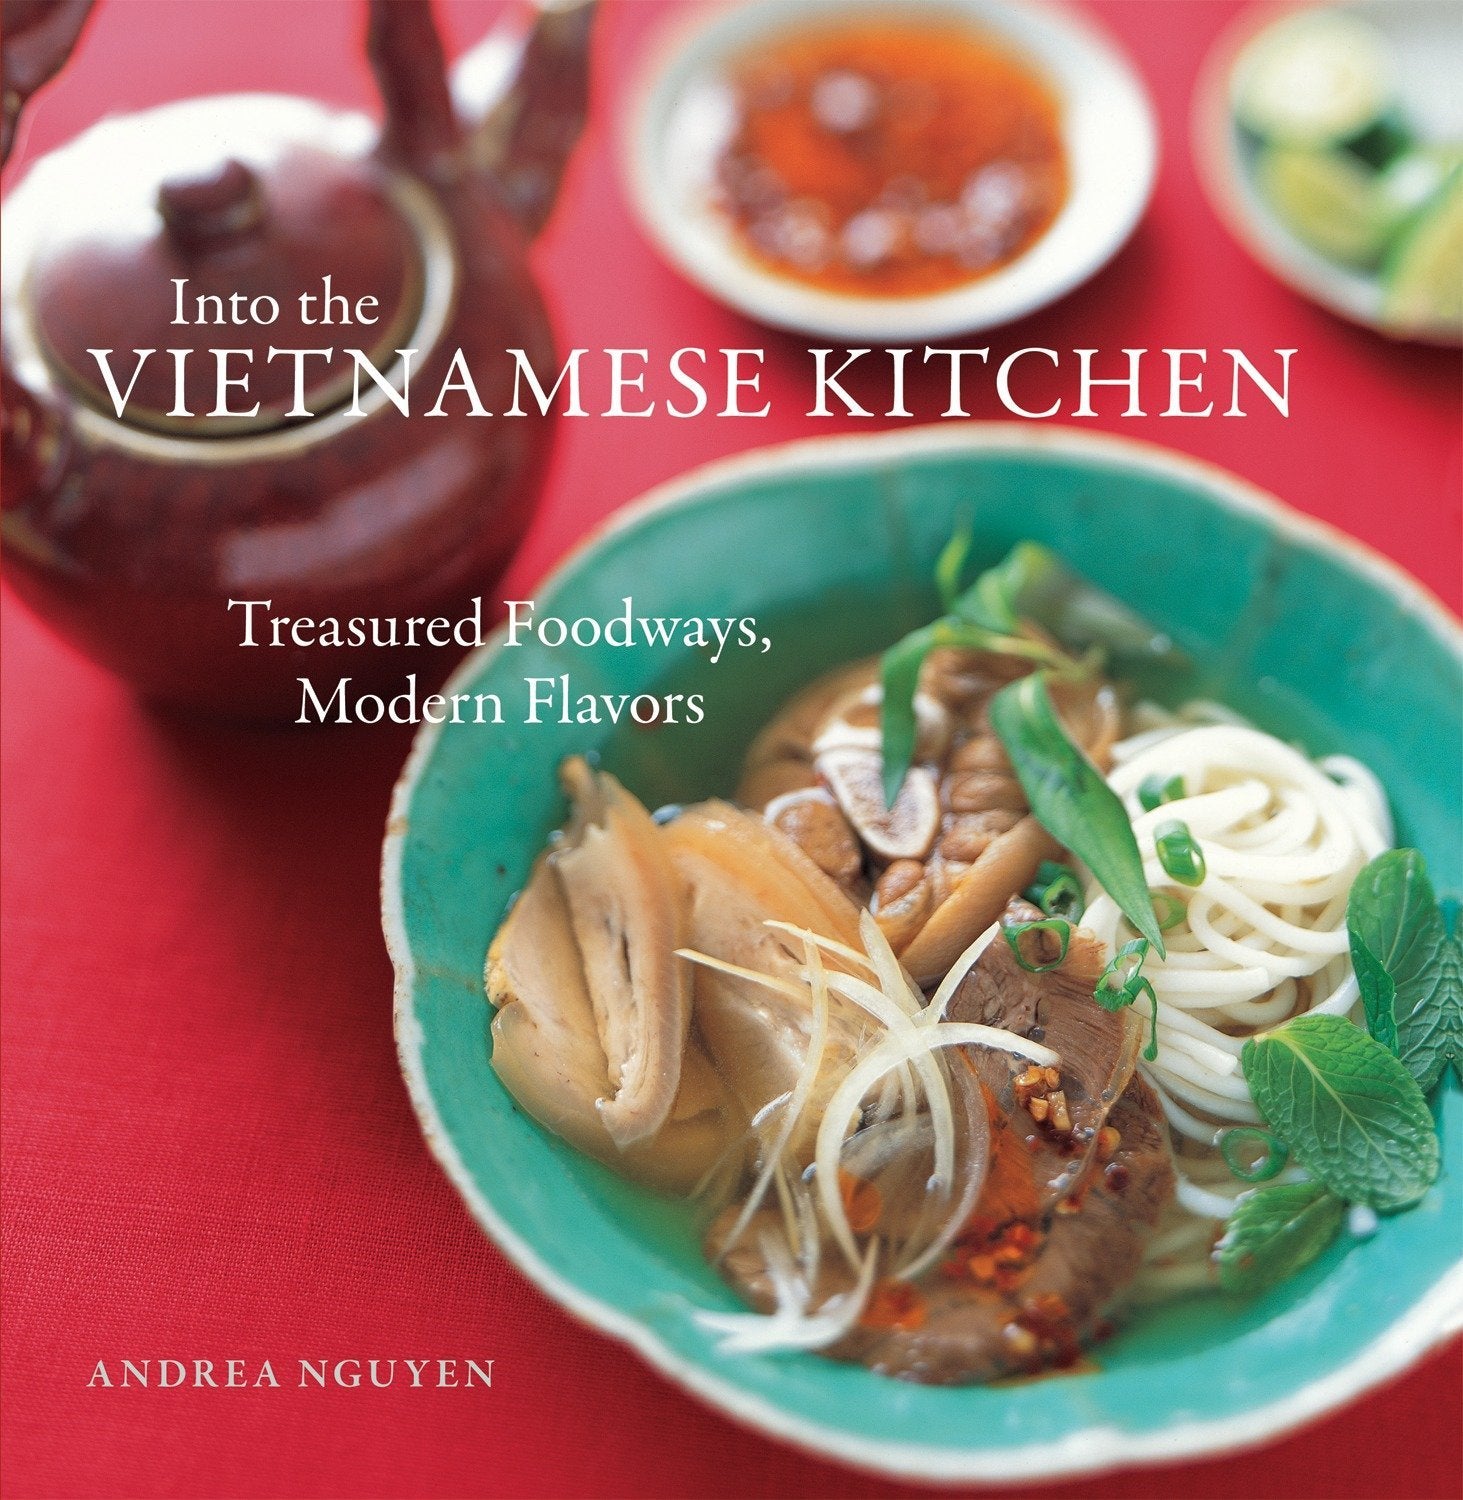 Into the Vietnamese Kitchen: Treasured Foodways, Modern Flavors (Andrea Nguyen) *Signed*